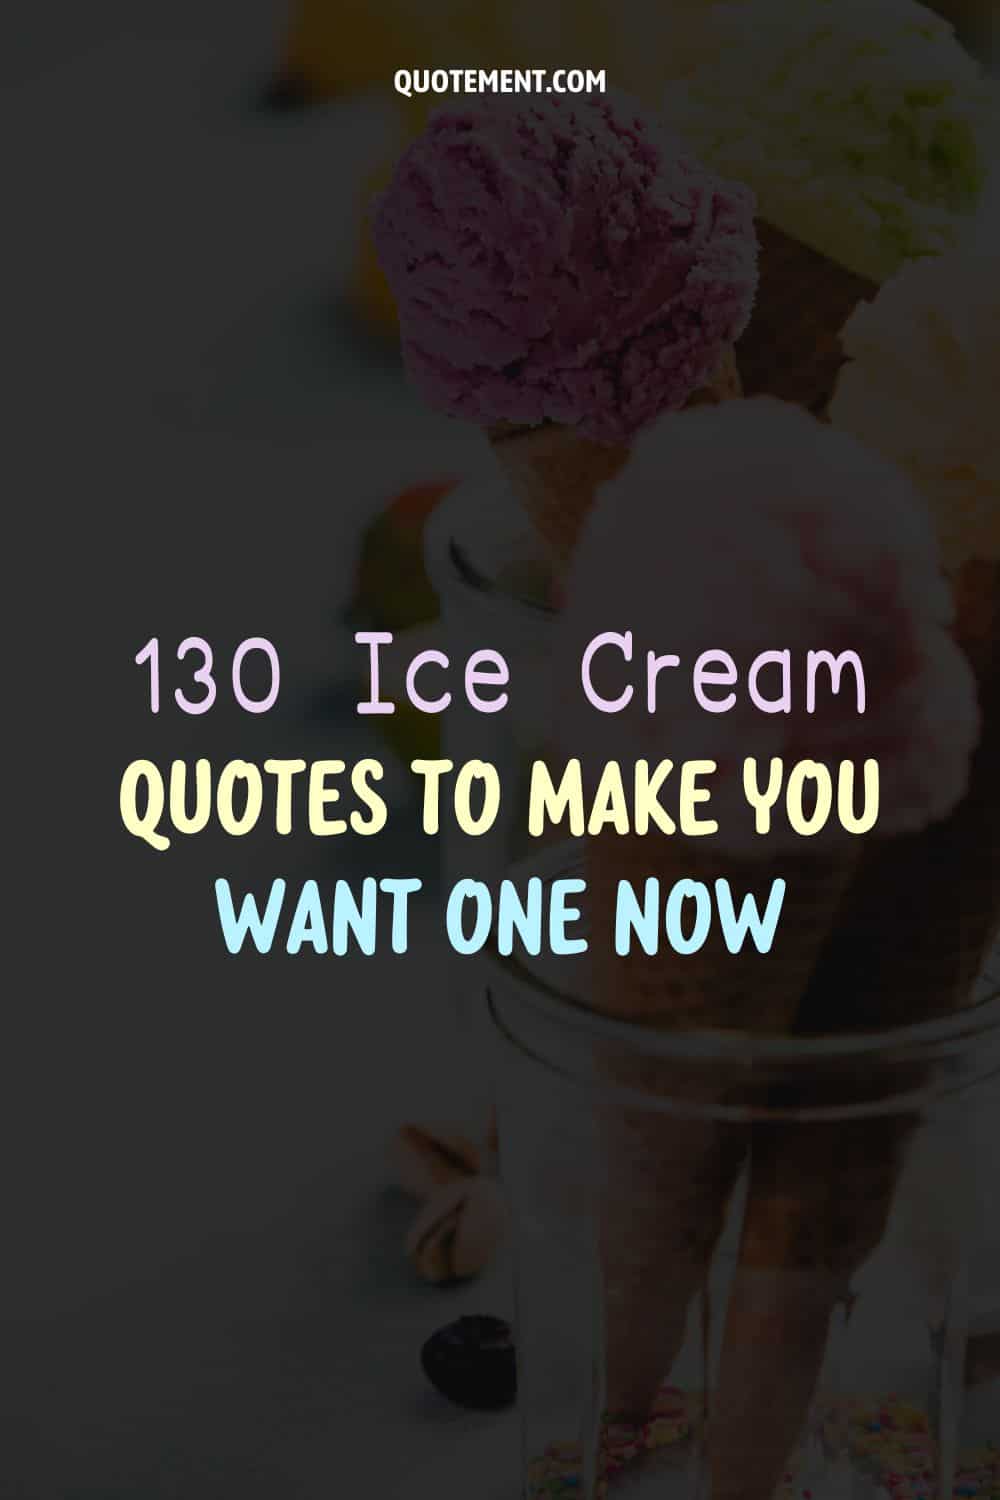 130 Ice Cream Quotes To Support Your Sugar Cravings
